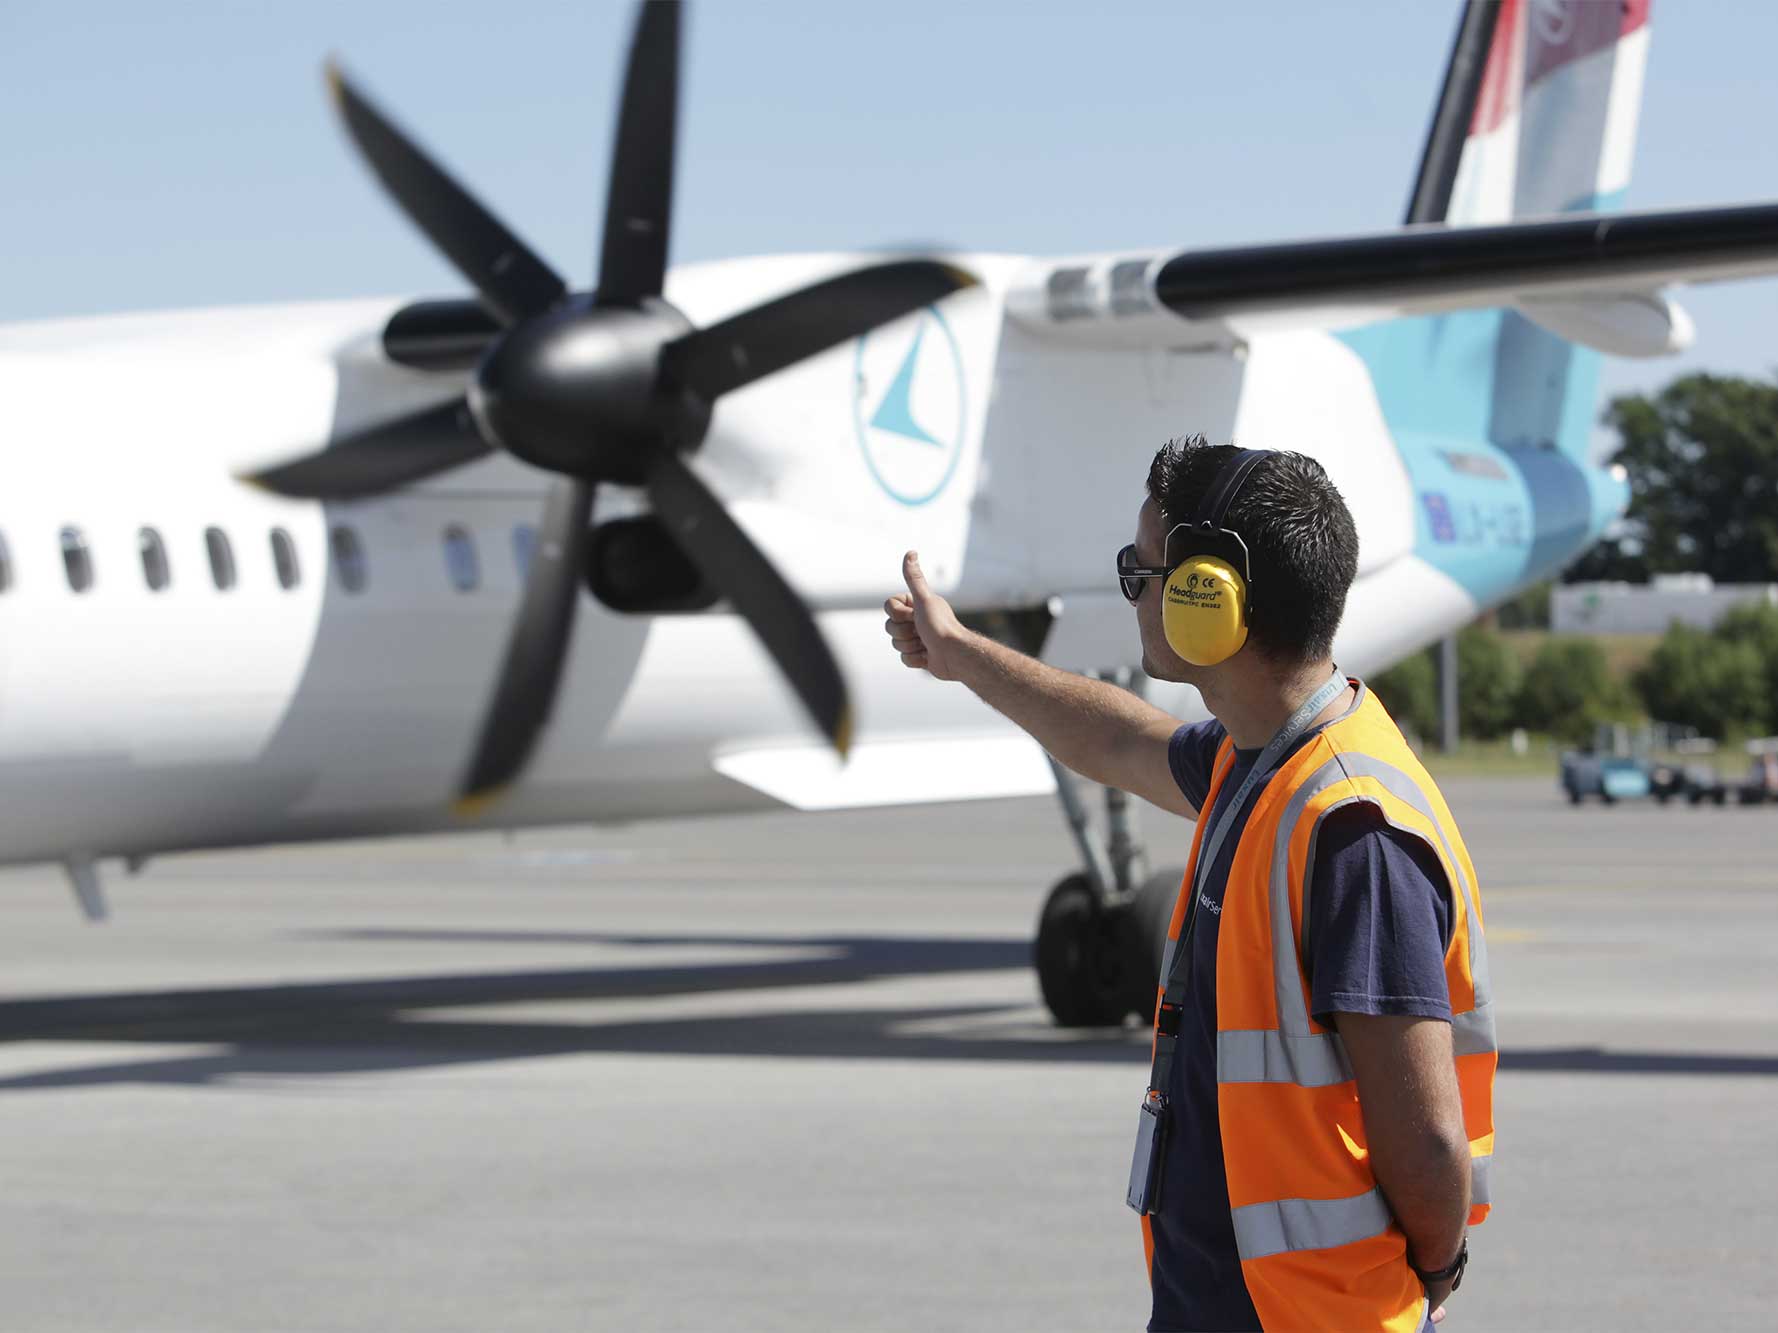 https://www.air-journal.fr/wp-content/uploads/air-journal-aeroport-findel-luxembourg-bombardier-Q400-source-site-luxair.jpg